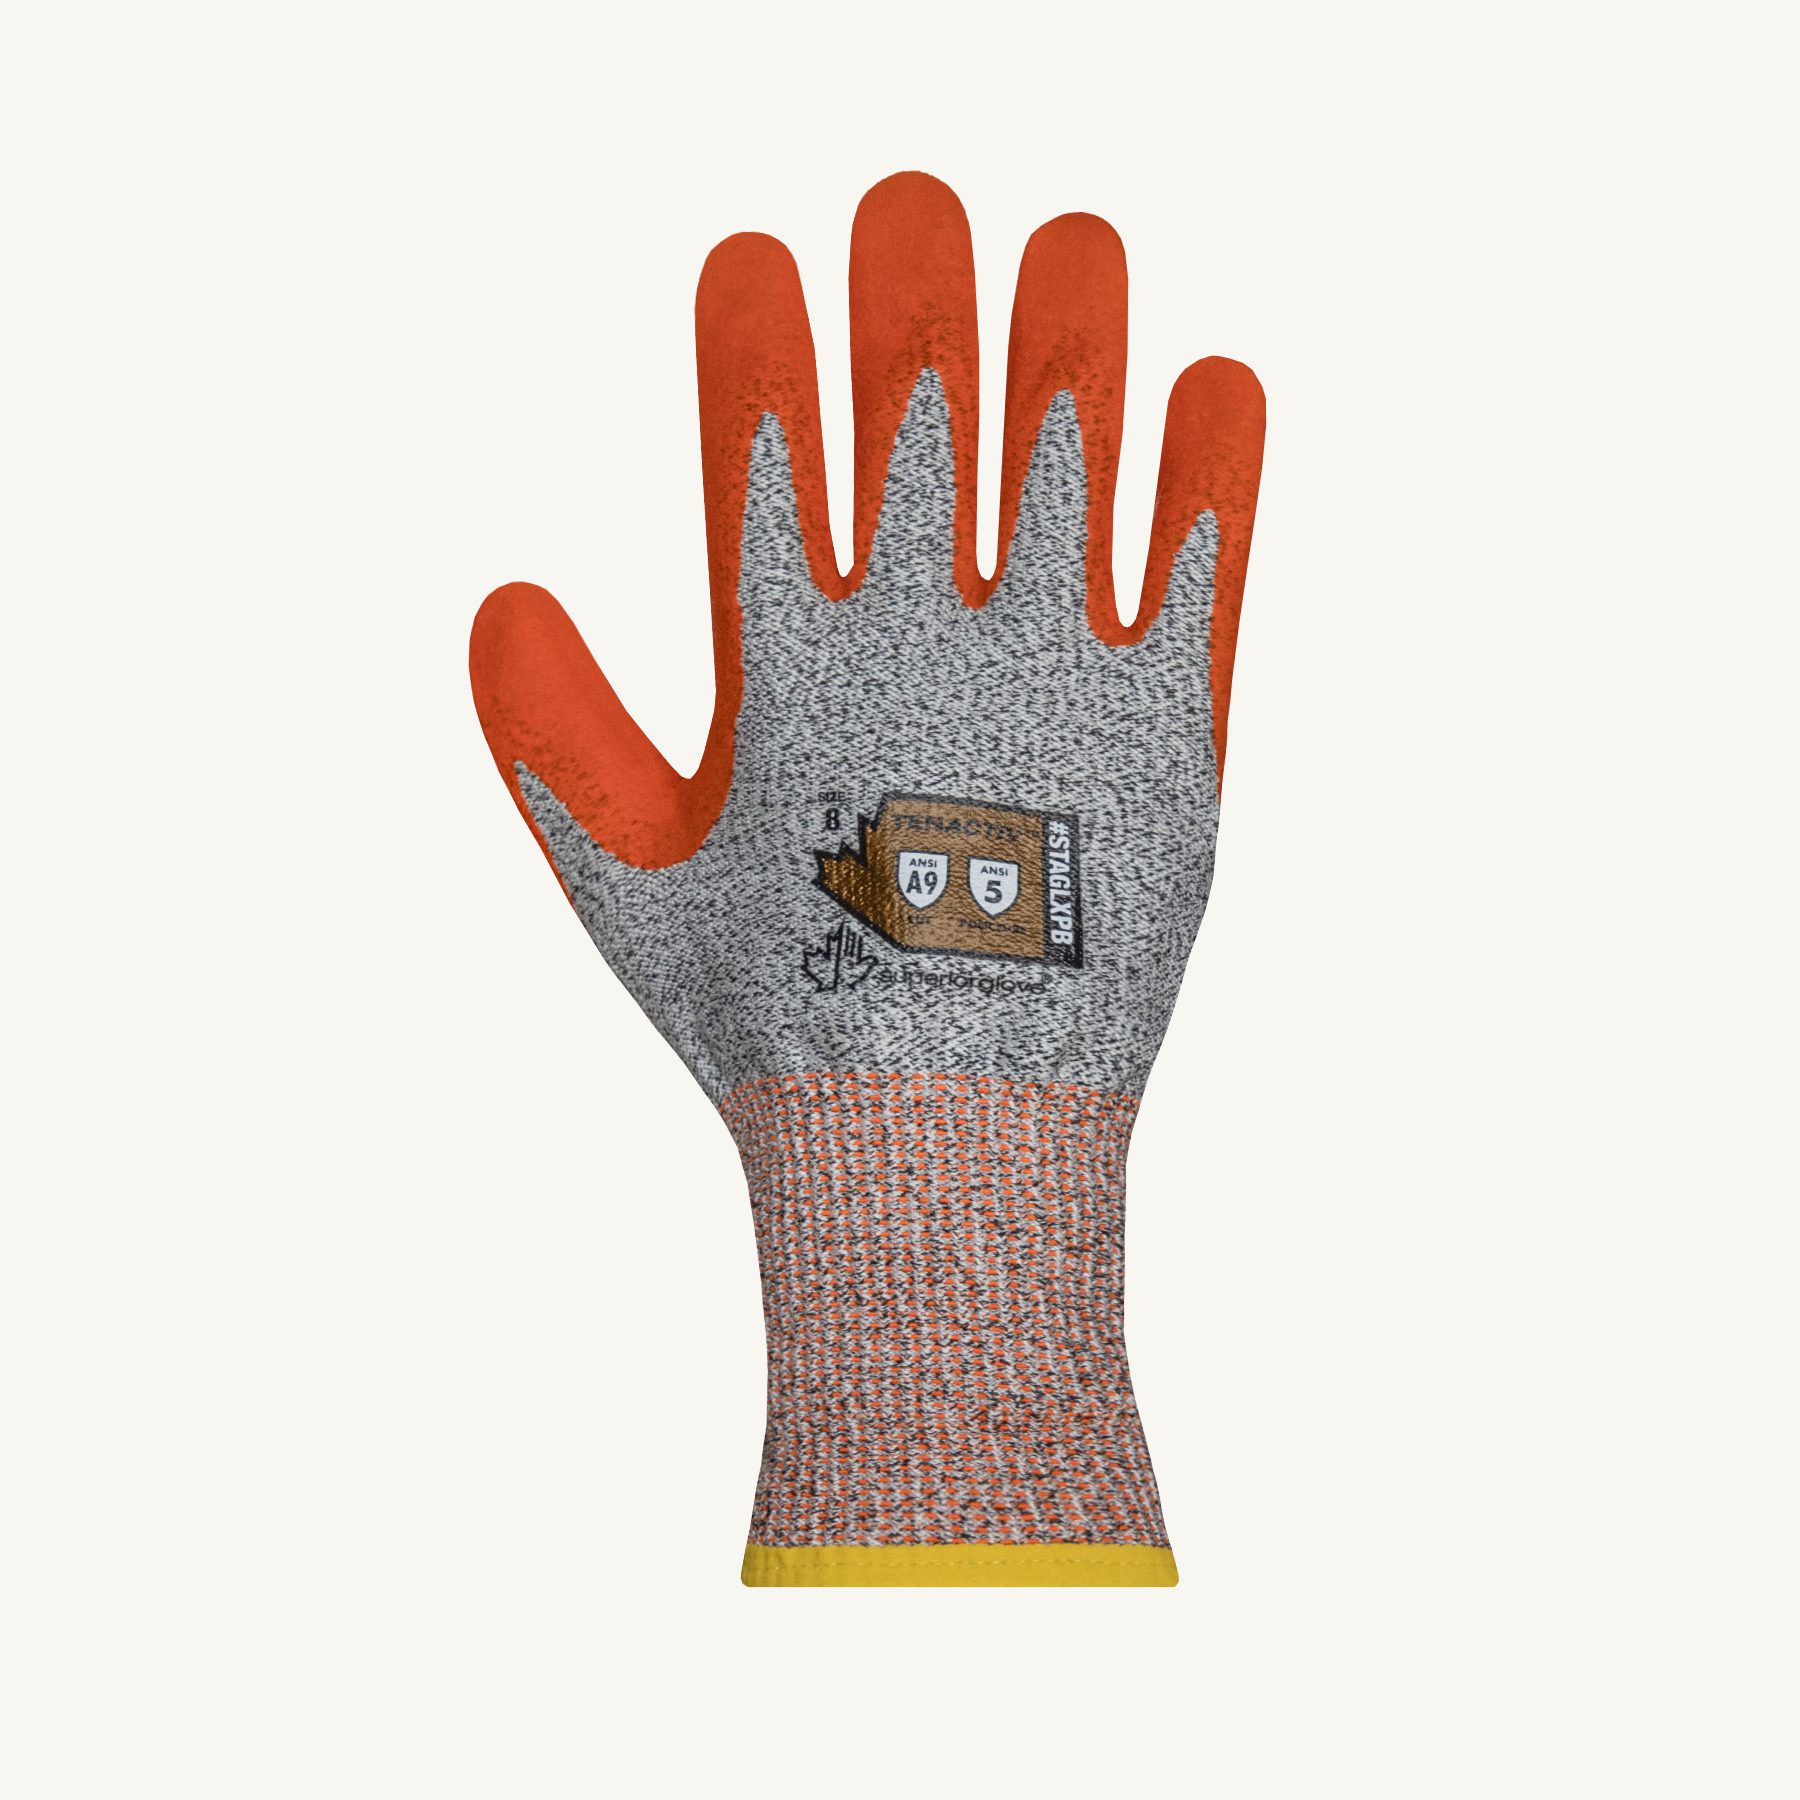 Cut Resistant Set for Men, ANSI A9 Cut Resistant Gloves with Foam Nitrile  Coated & ANSI A6 Cut Resistant Sleeves,Cut Proof Gloves & Protective Arm  Sleeves,for Cutting Metal and Wood Carving 